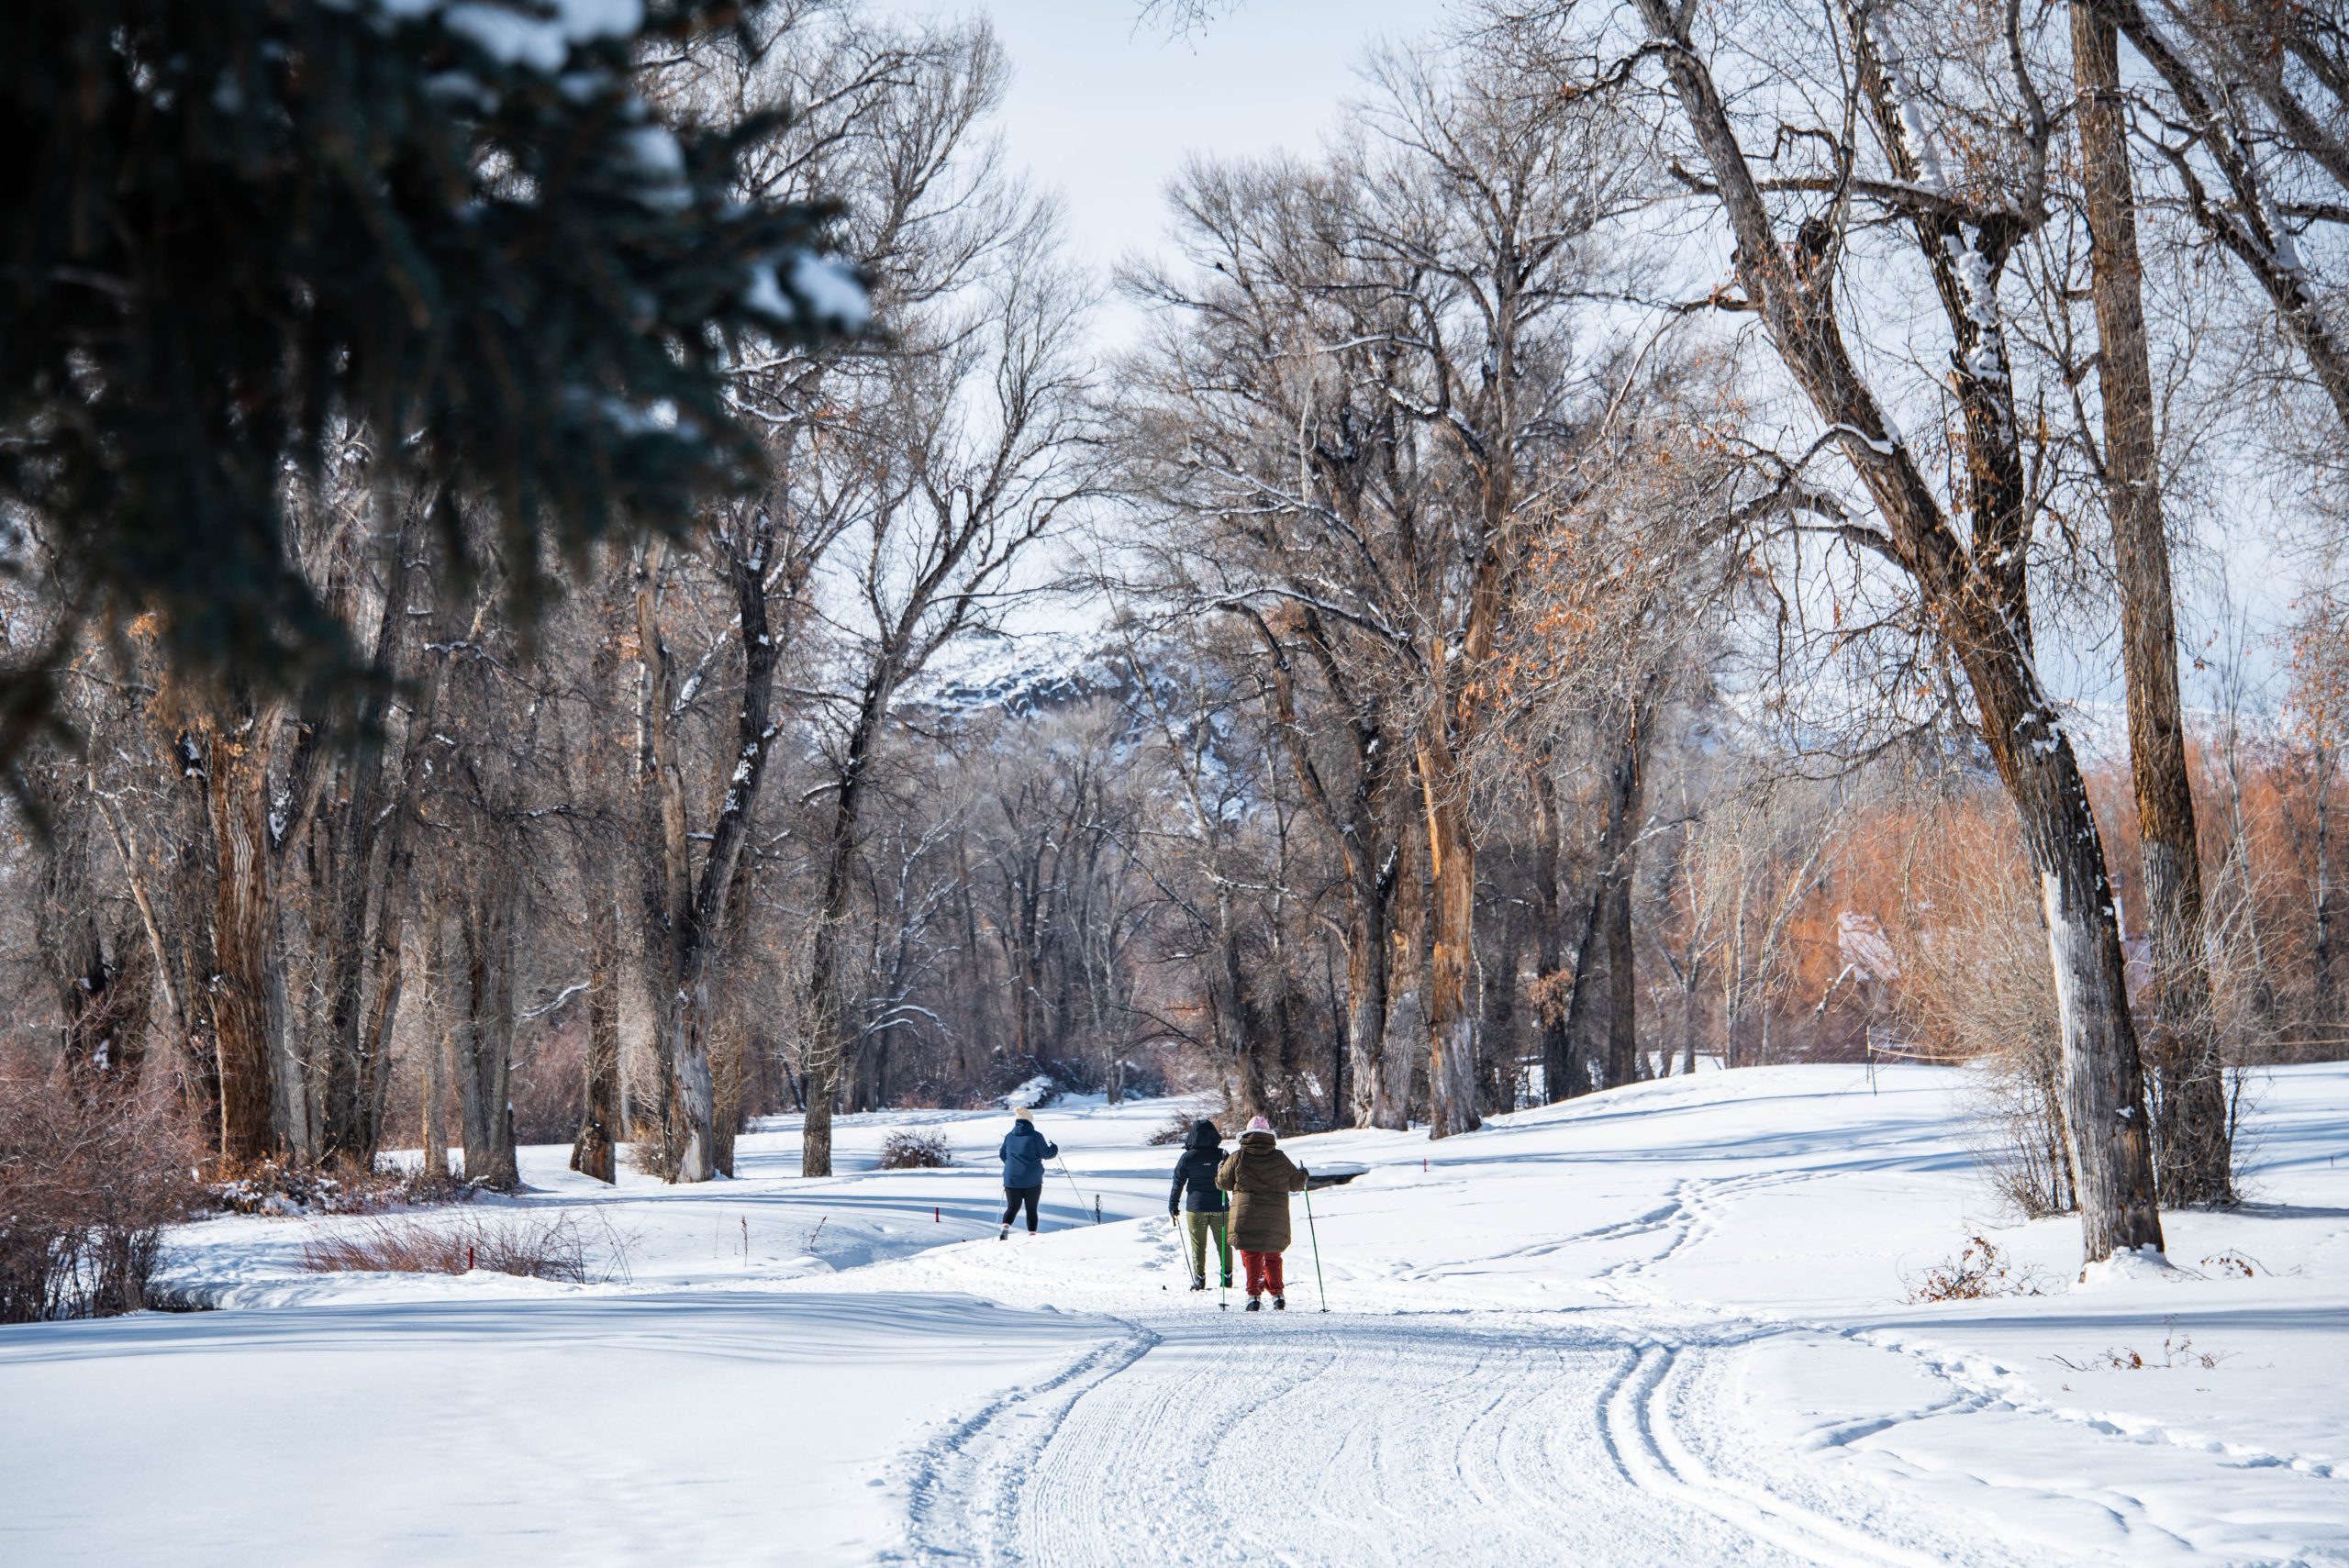 Some cross-country skiers on a track lined with trees